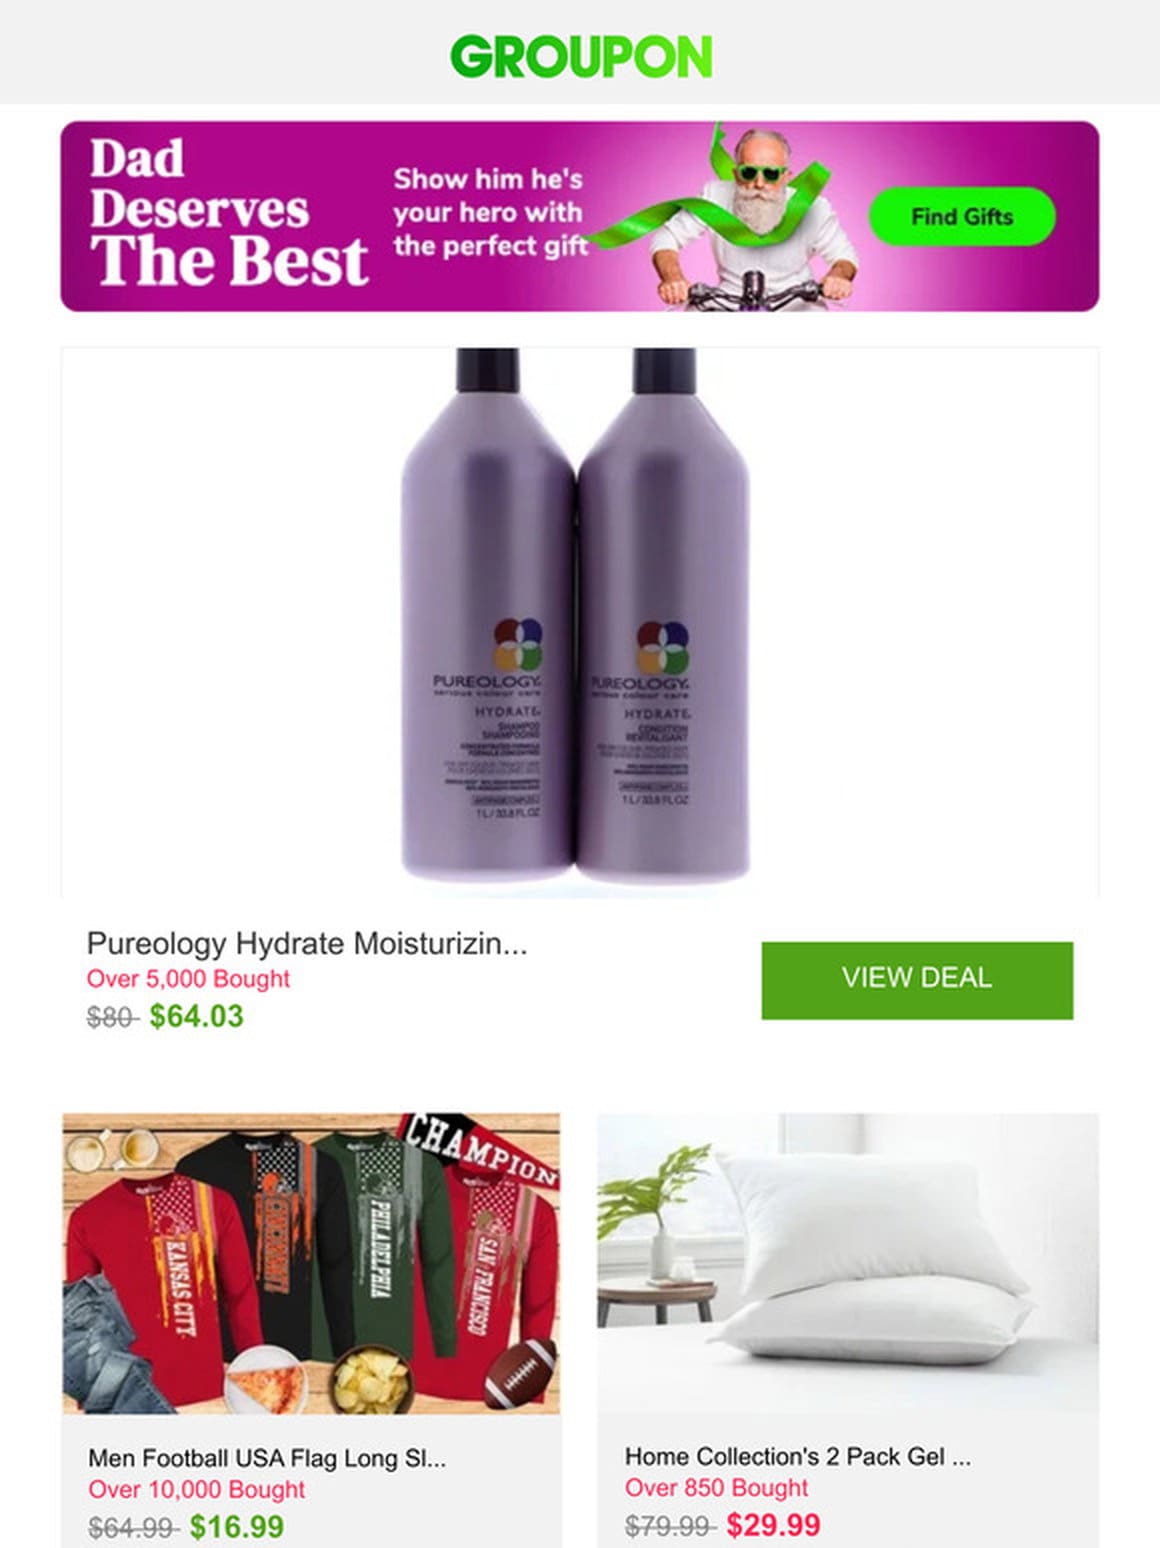 Pureology Hydrate Moisturizing Shampoo and or Conditioner (Liter 33.8oz or 9oz) and More